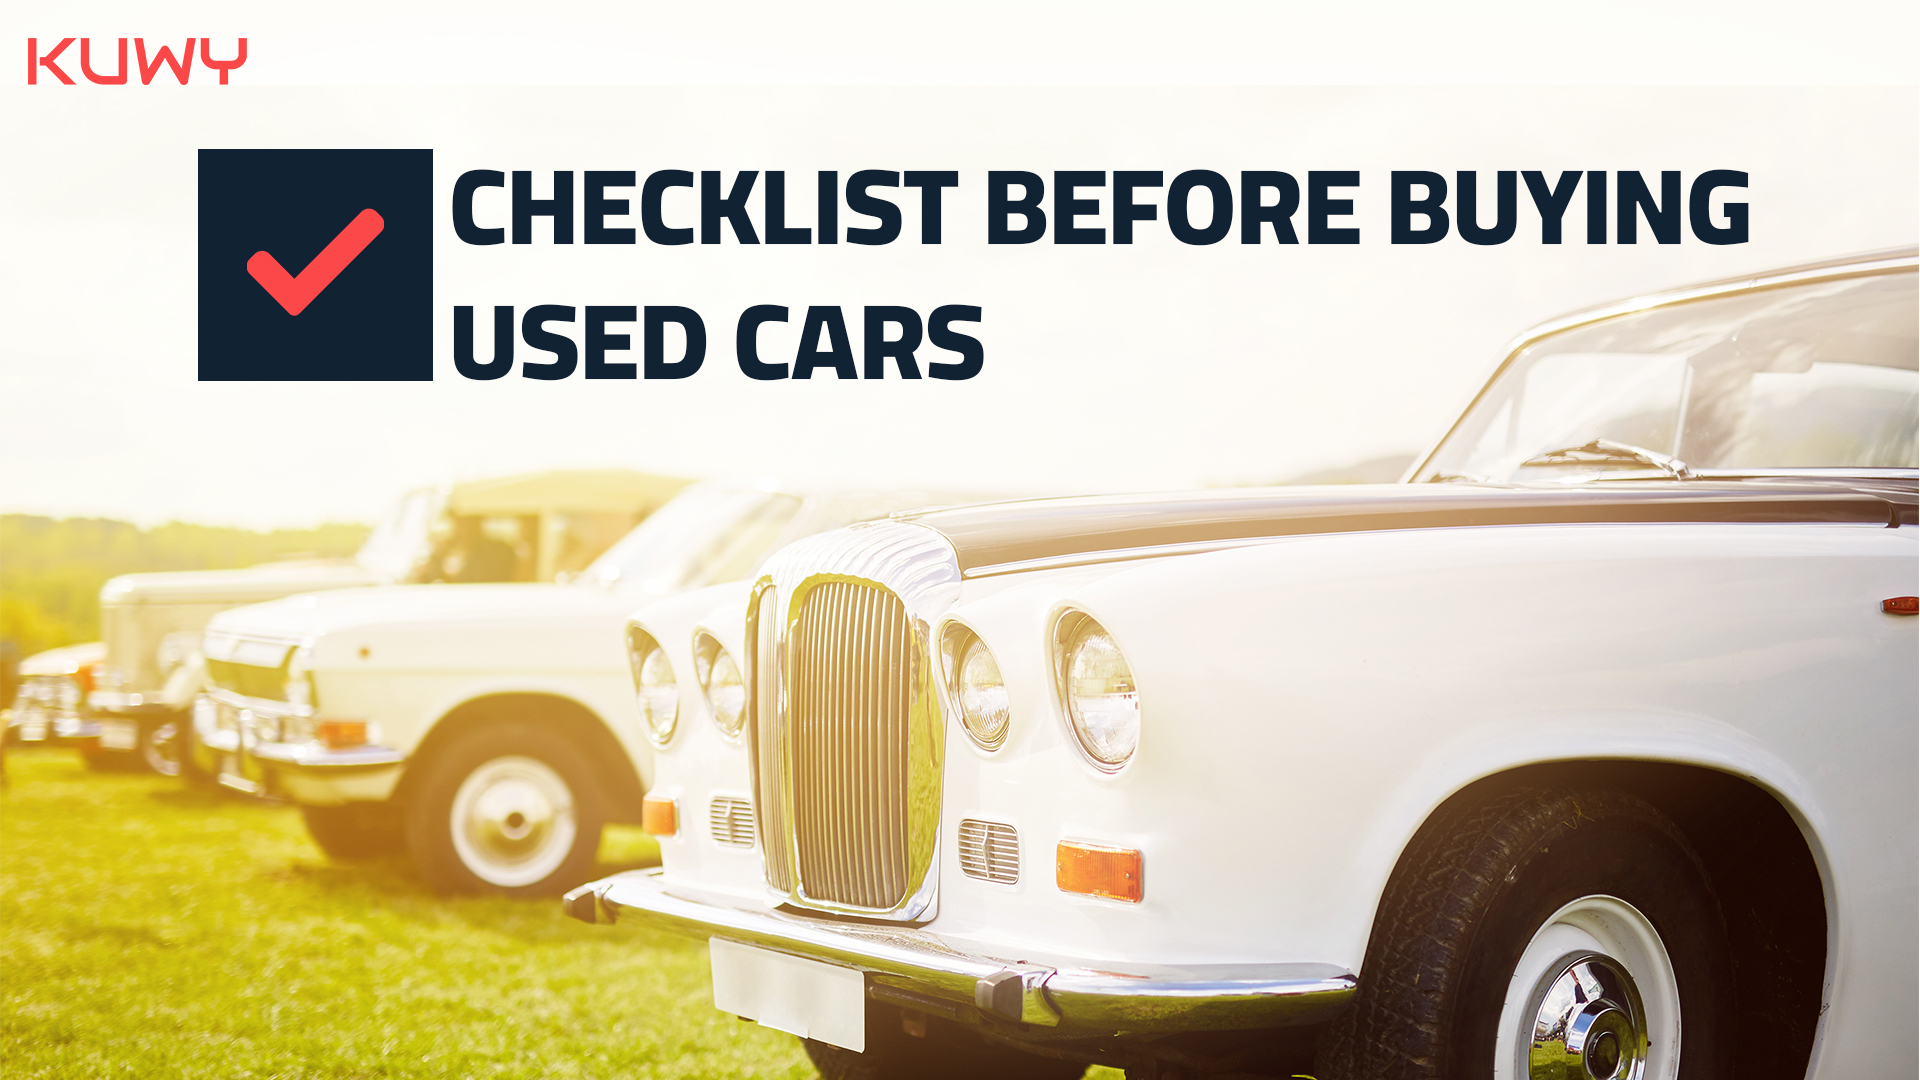 Checklist to follow to buy Used Cars